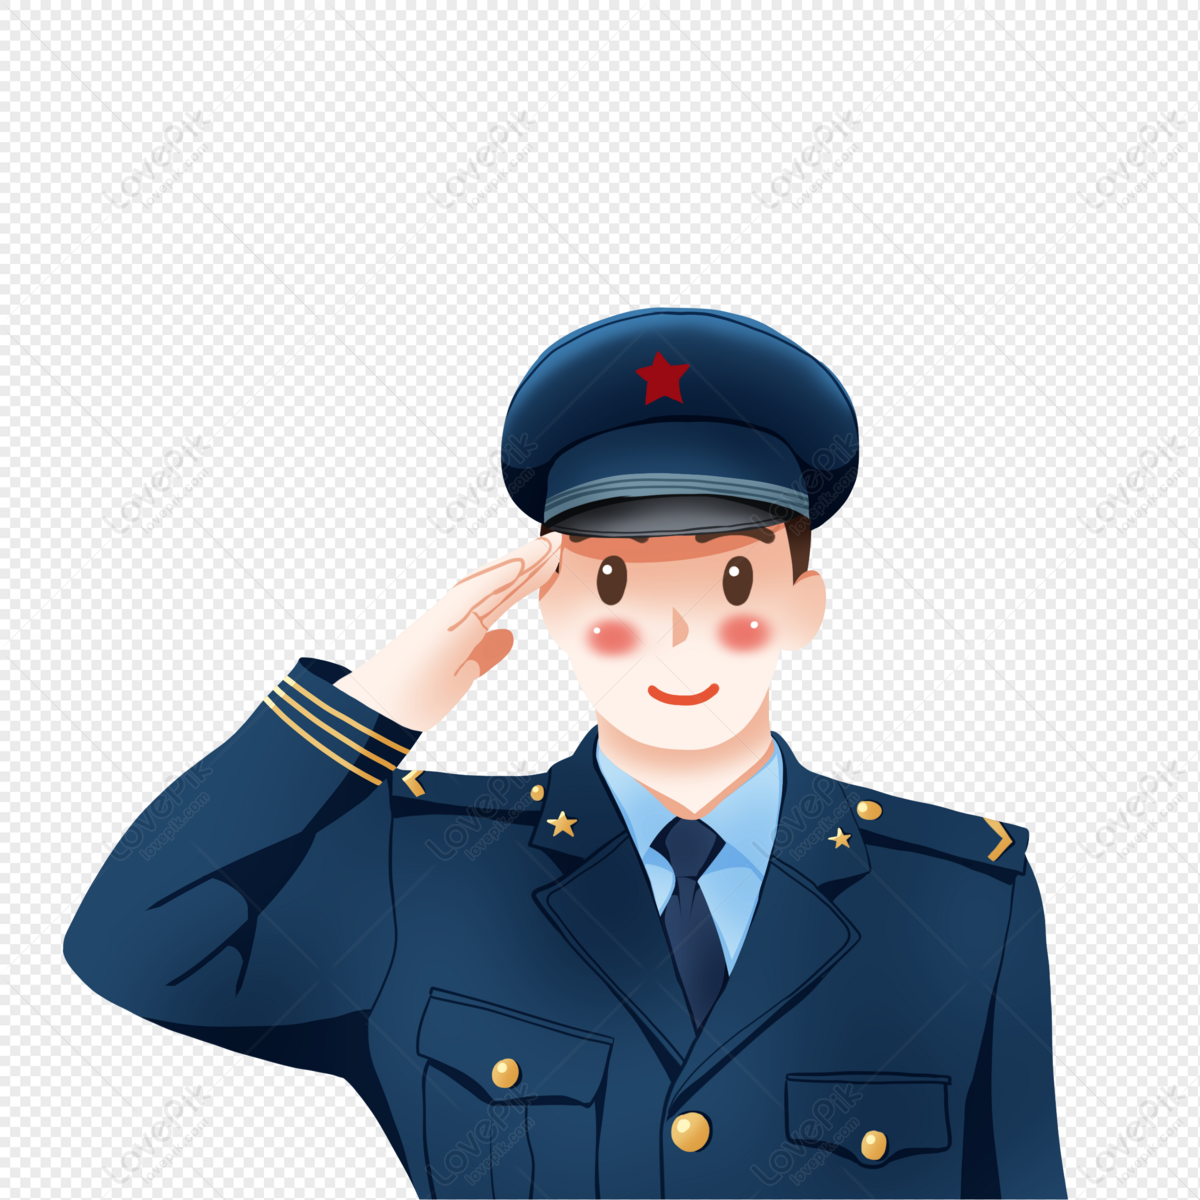 Air Force Military Uniform Free PNG And Clipart Image For Free Download -  Lovepik | 401458019